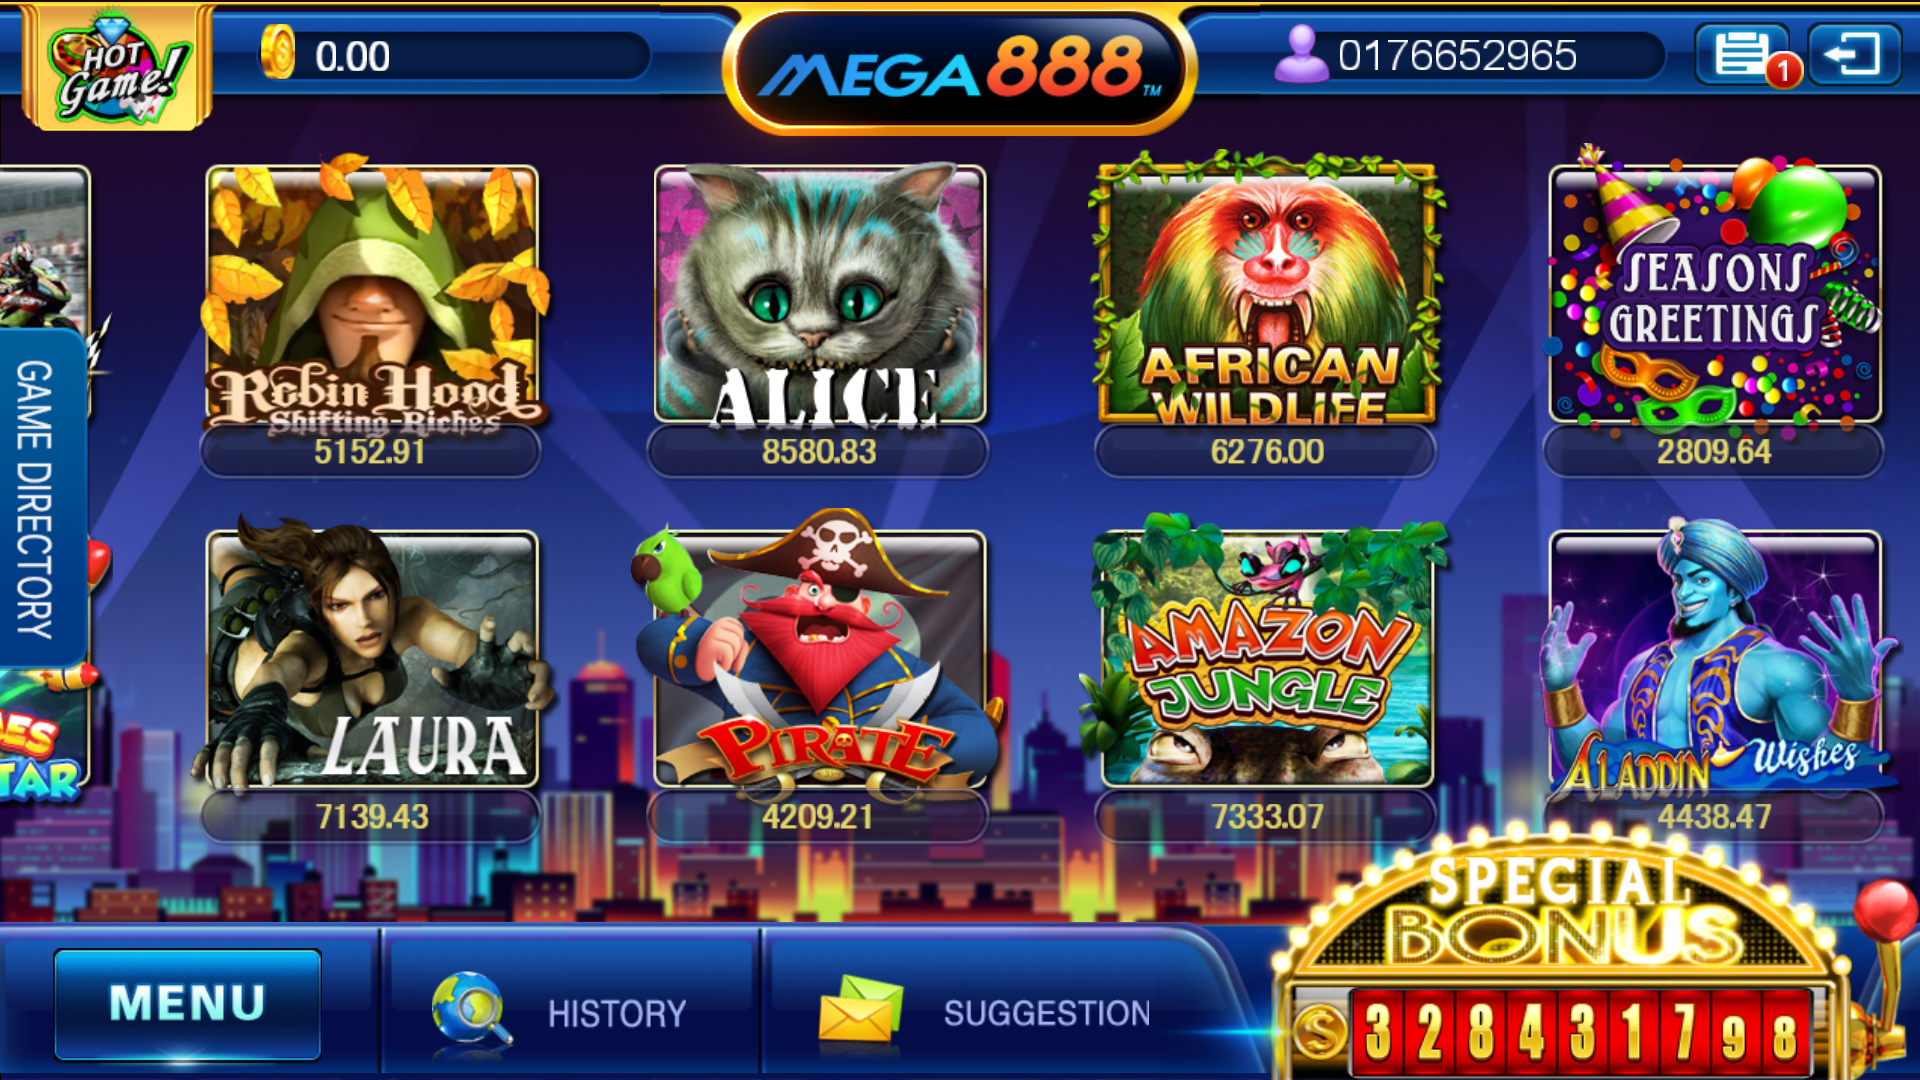 REASONS WHY MEGA888 IS THE BETTER THAN LANDED SLOTS